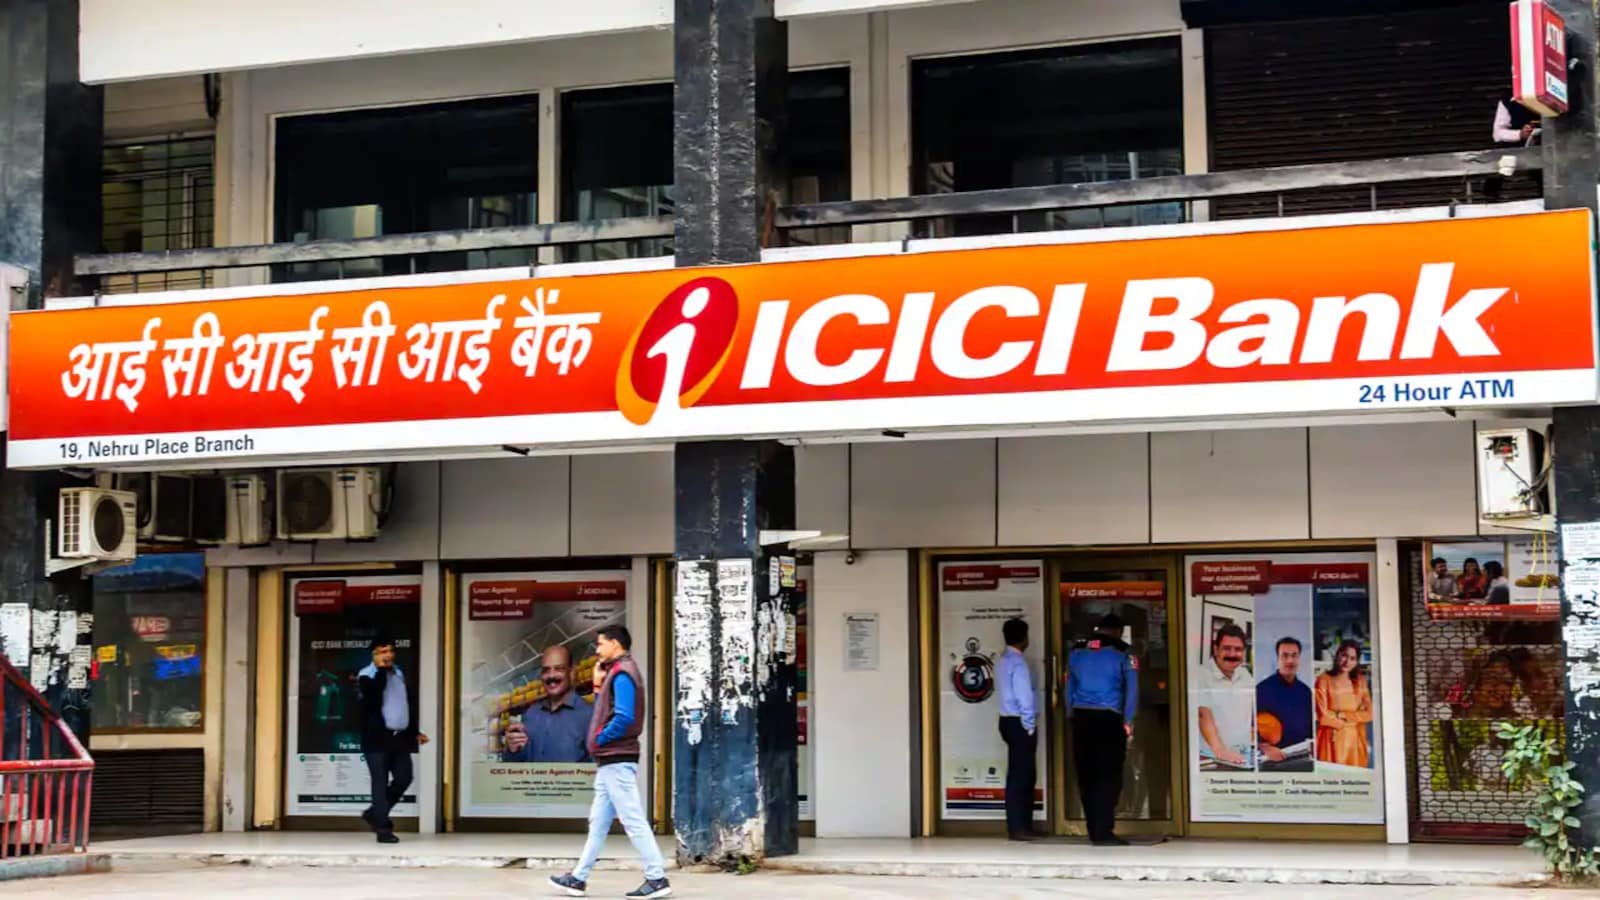 icici bank posts 50% growth in q1 profit at rs 6,905 crore, provisions decline sharply